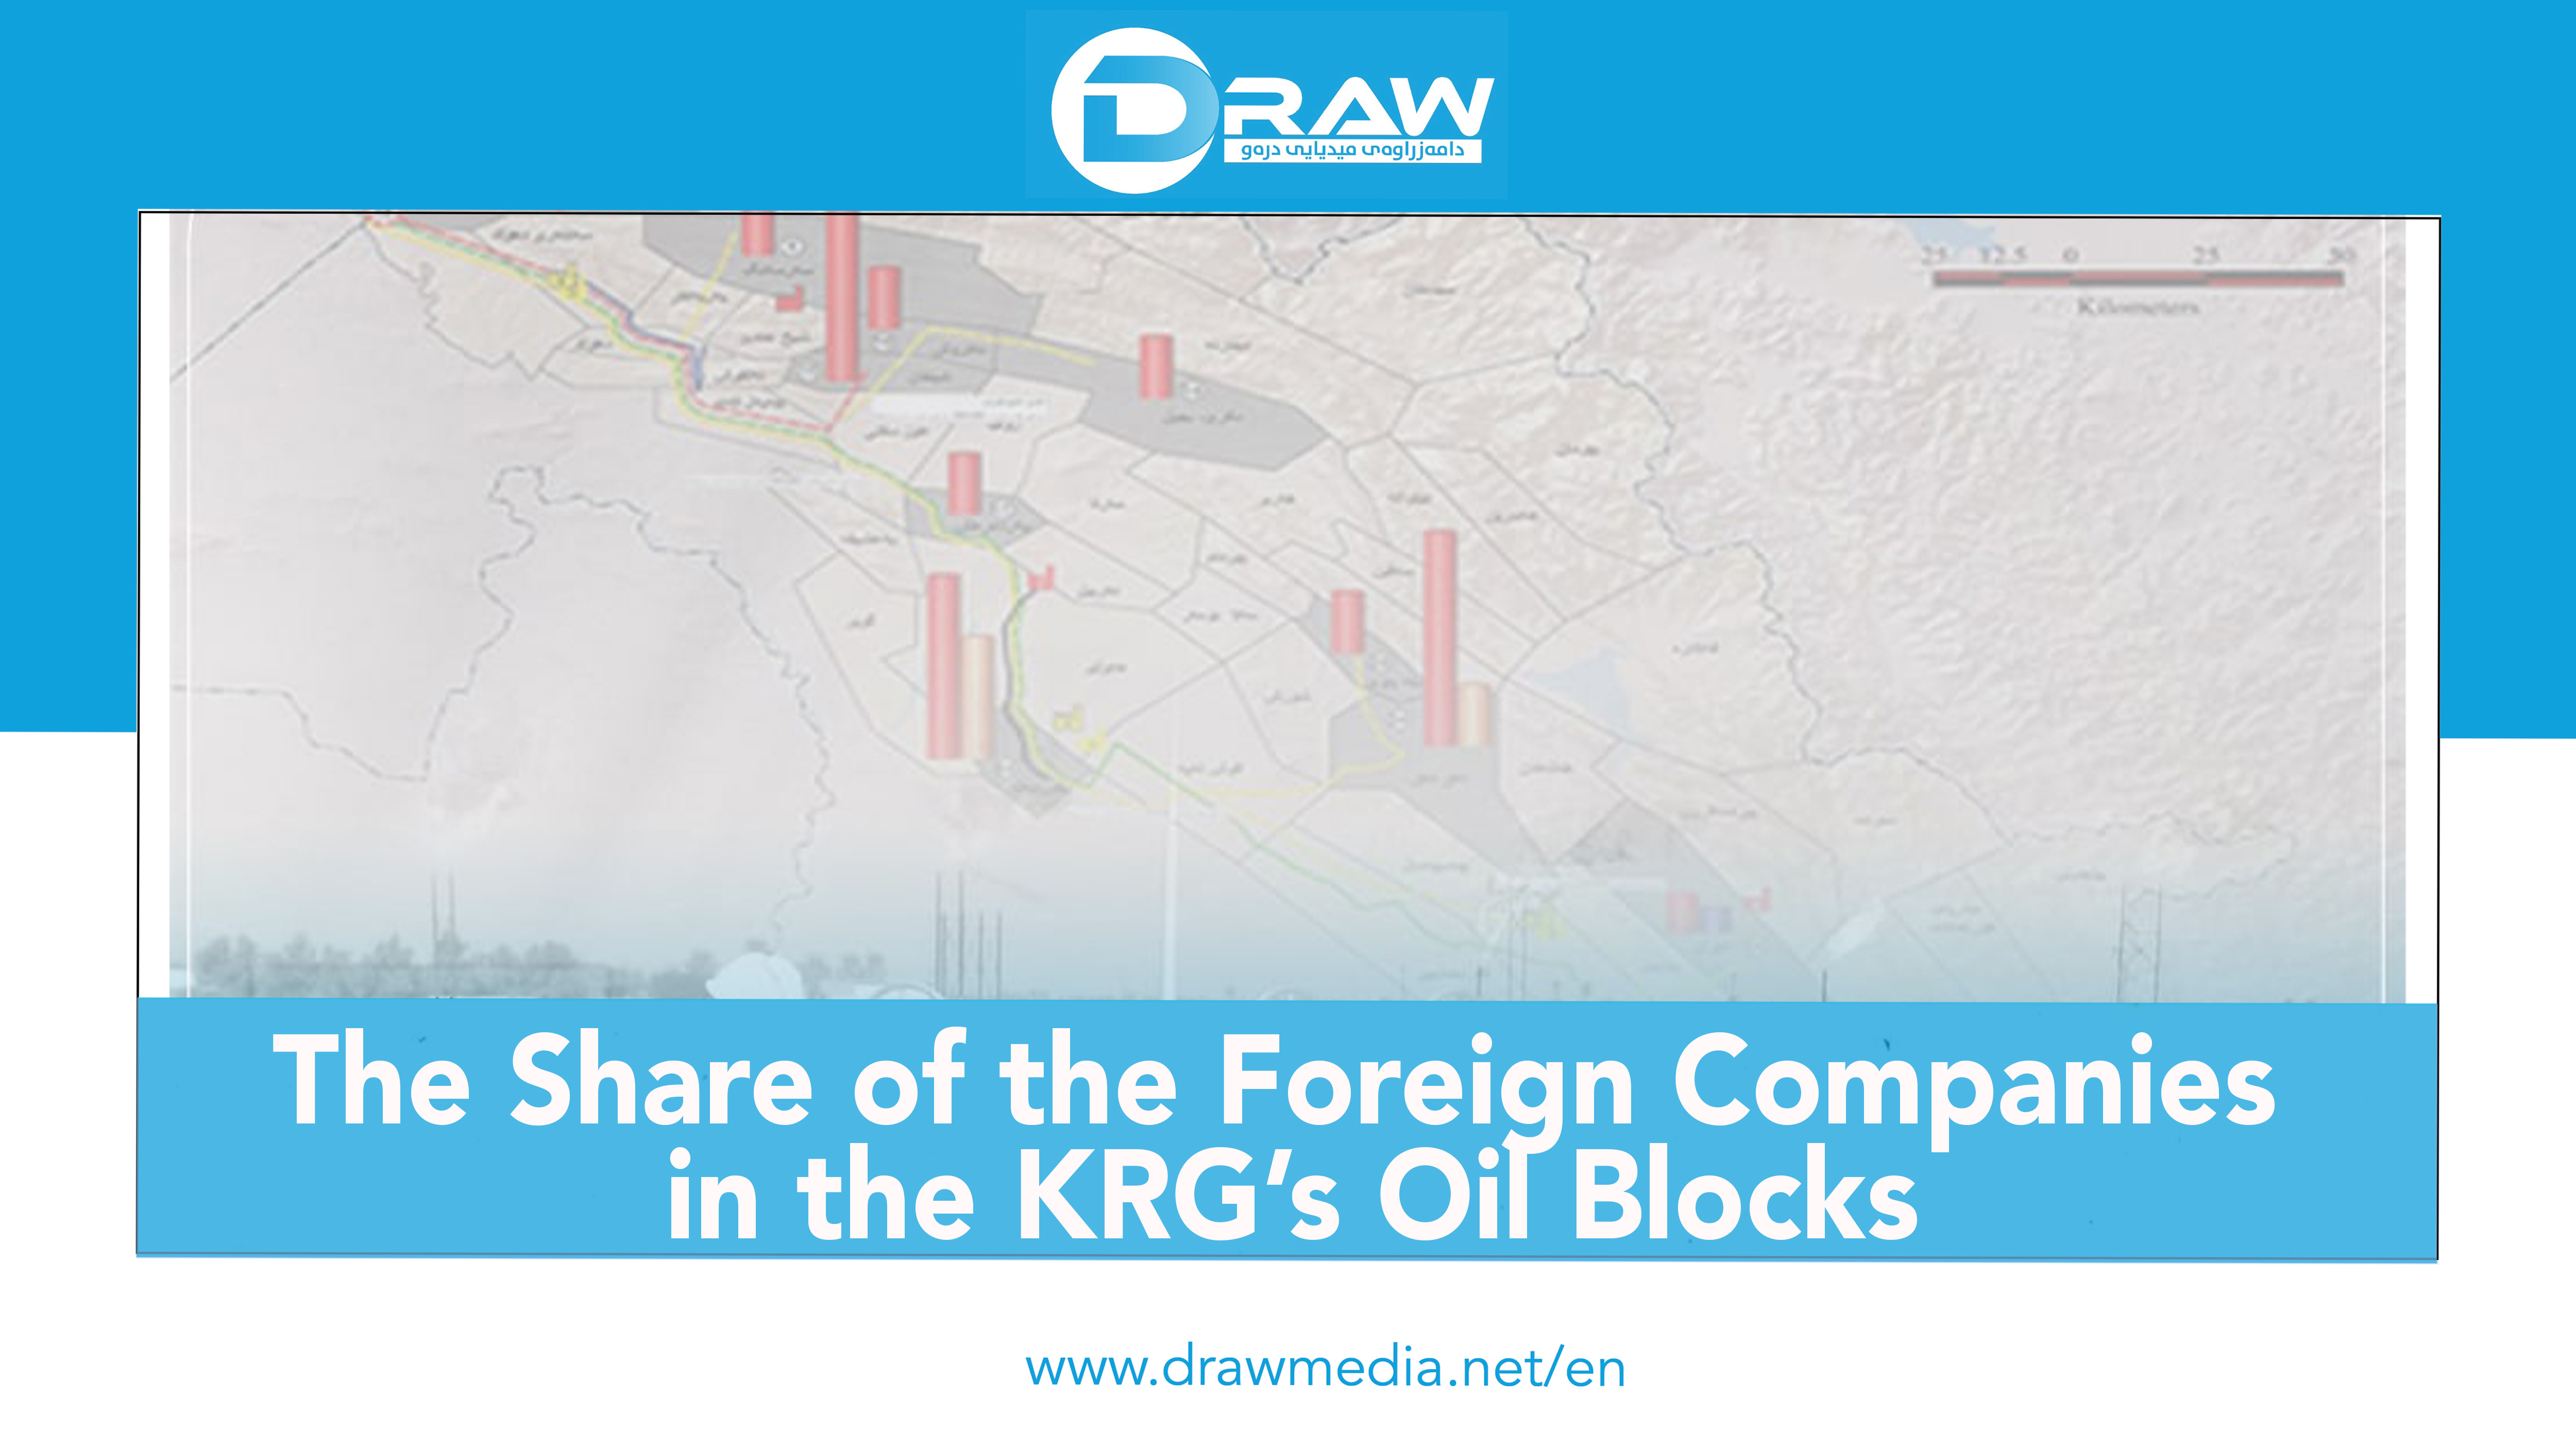 DrawMedia.net / The Share of the Foreign Companies in the KRG’s Oil Blocks